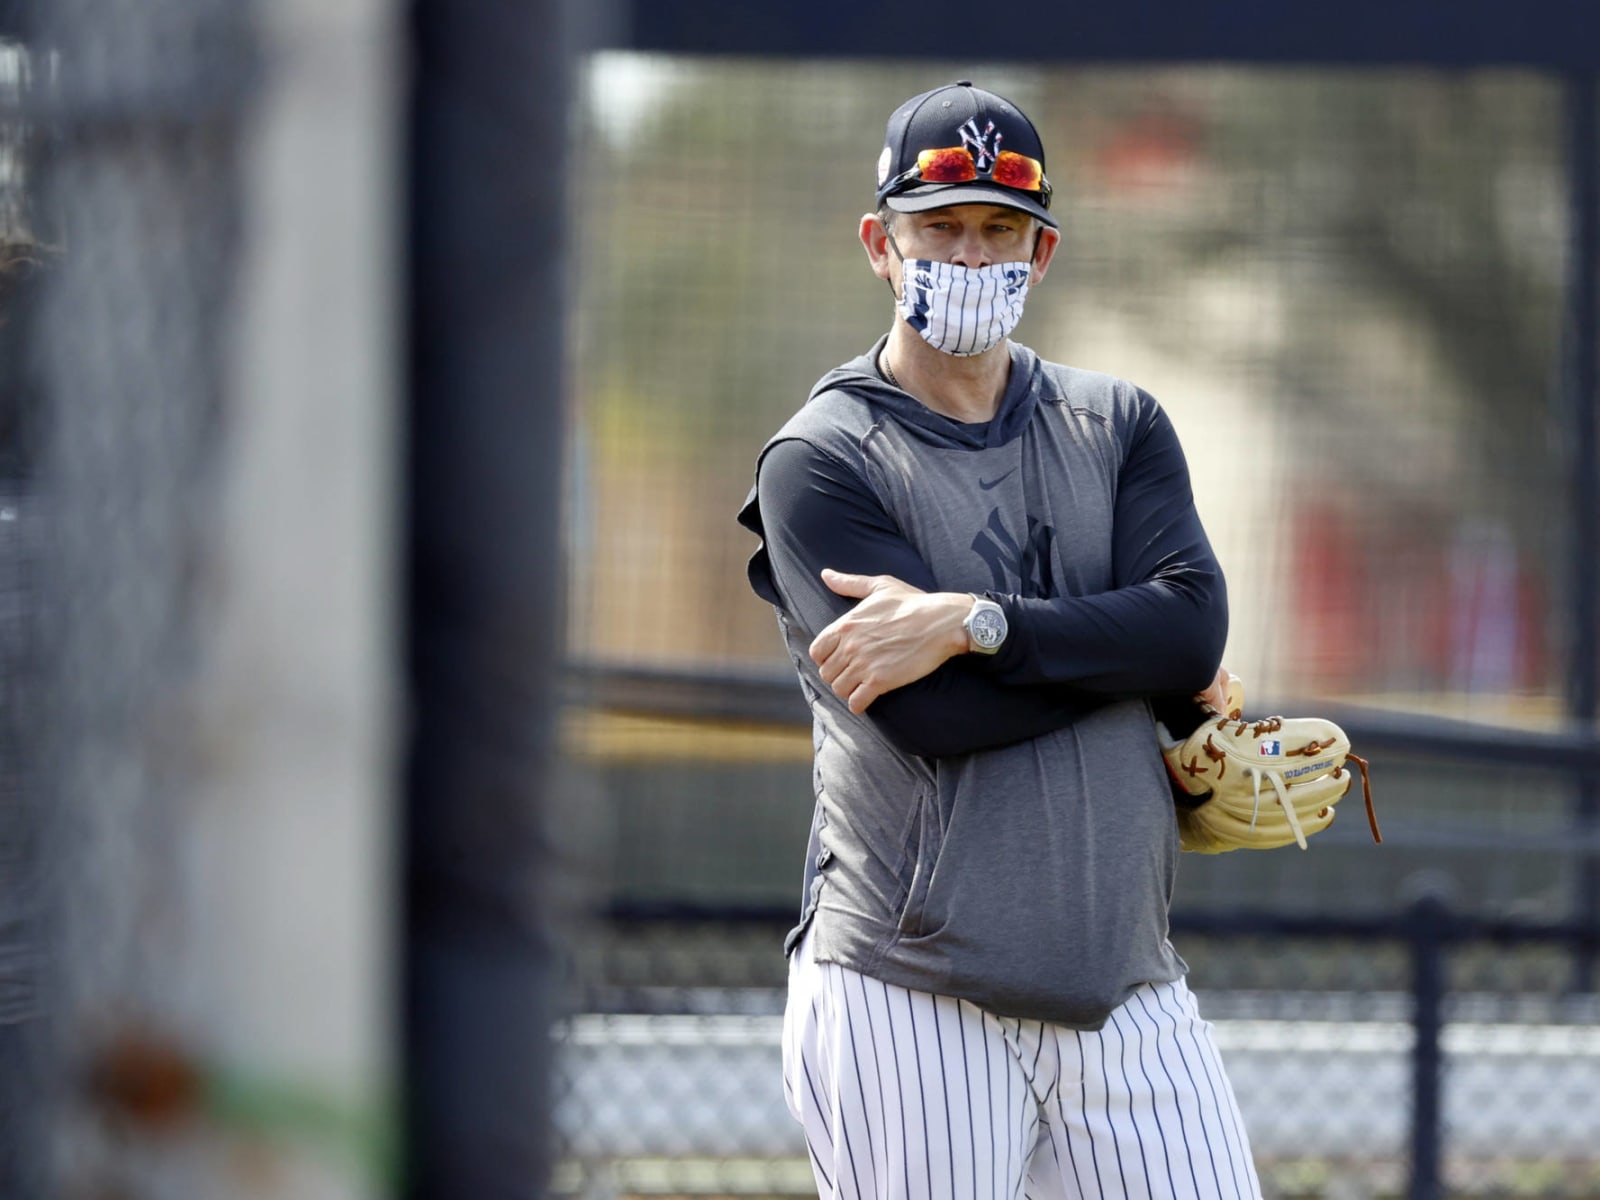 Aaron Boone feels great after pacemaker surgery